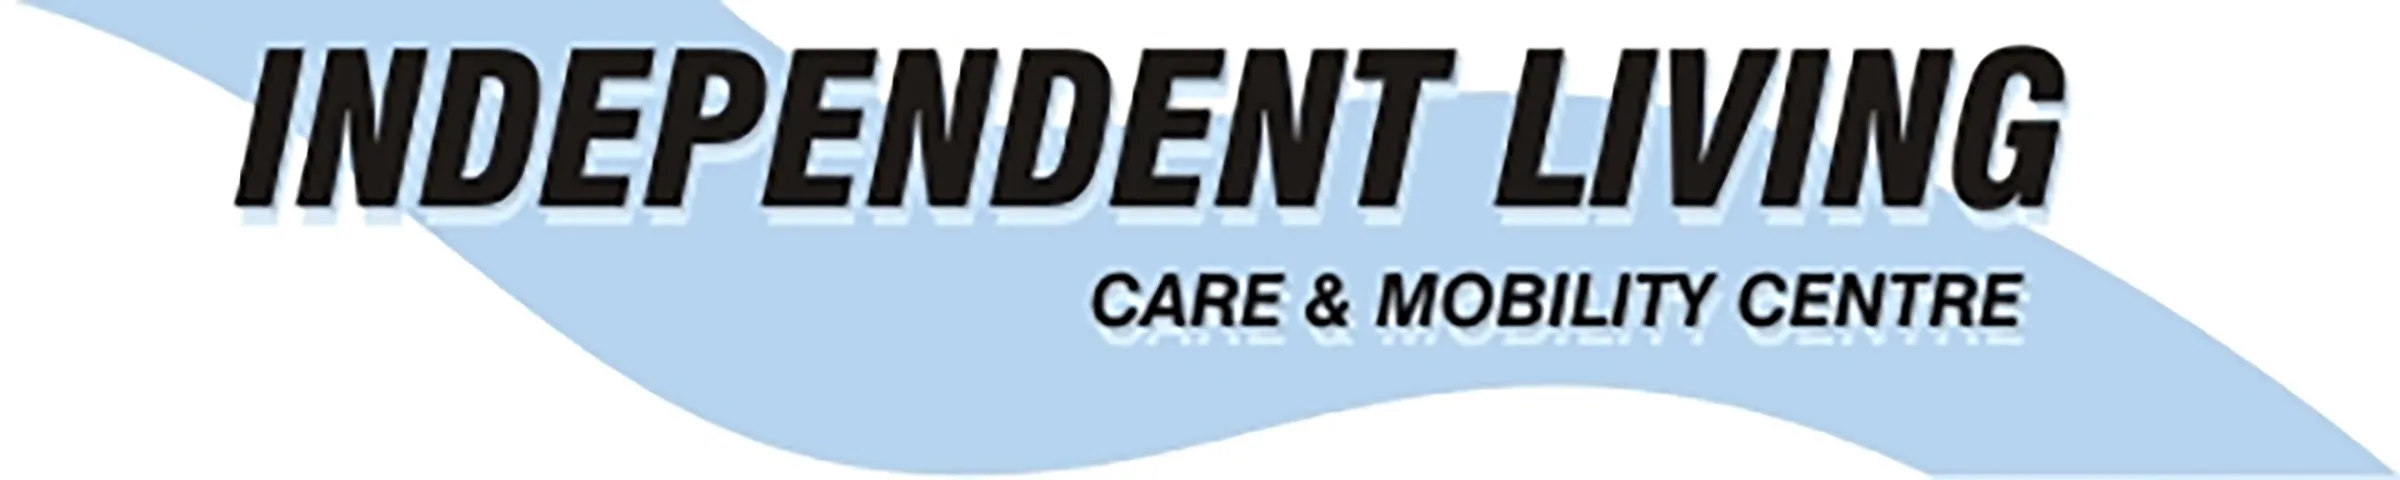 Independent Living Care and Mobility Centre